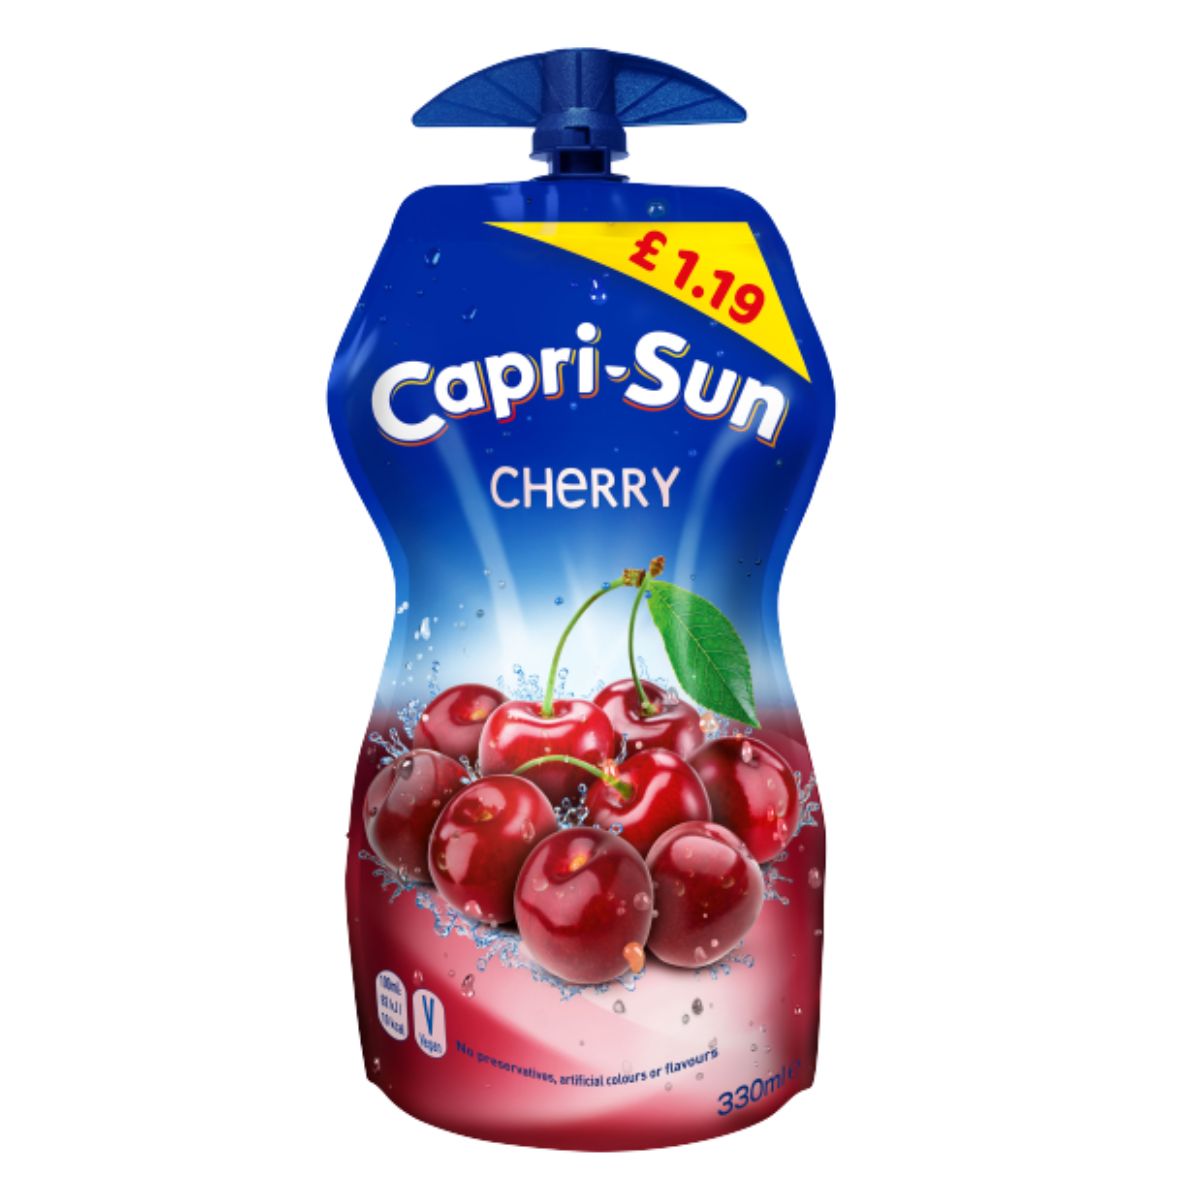 A bottle of Capri Sun - Cherry Juice - 330ml with a price tag of £1.19, featuring an image of cherries and splashing water on the label.